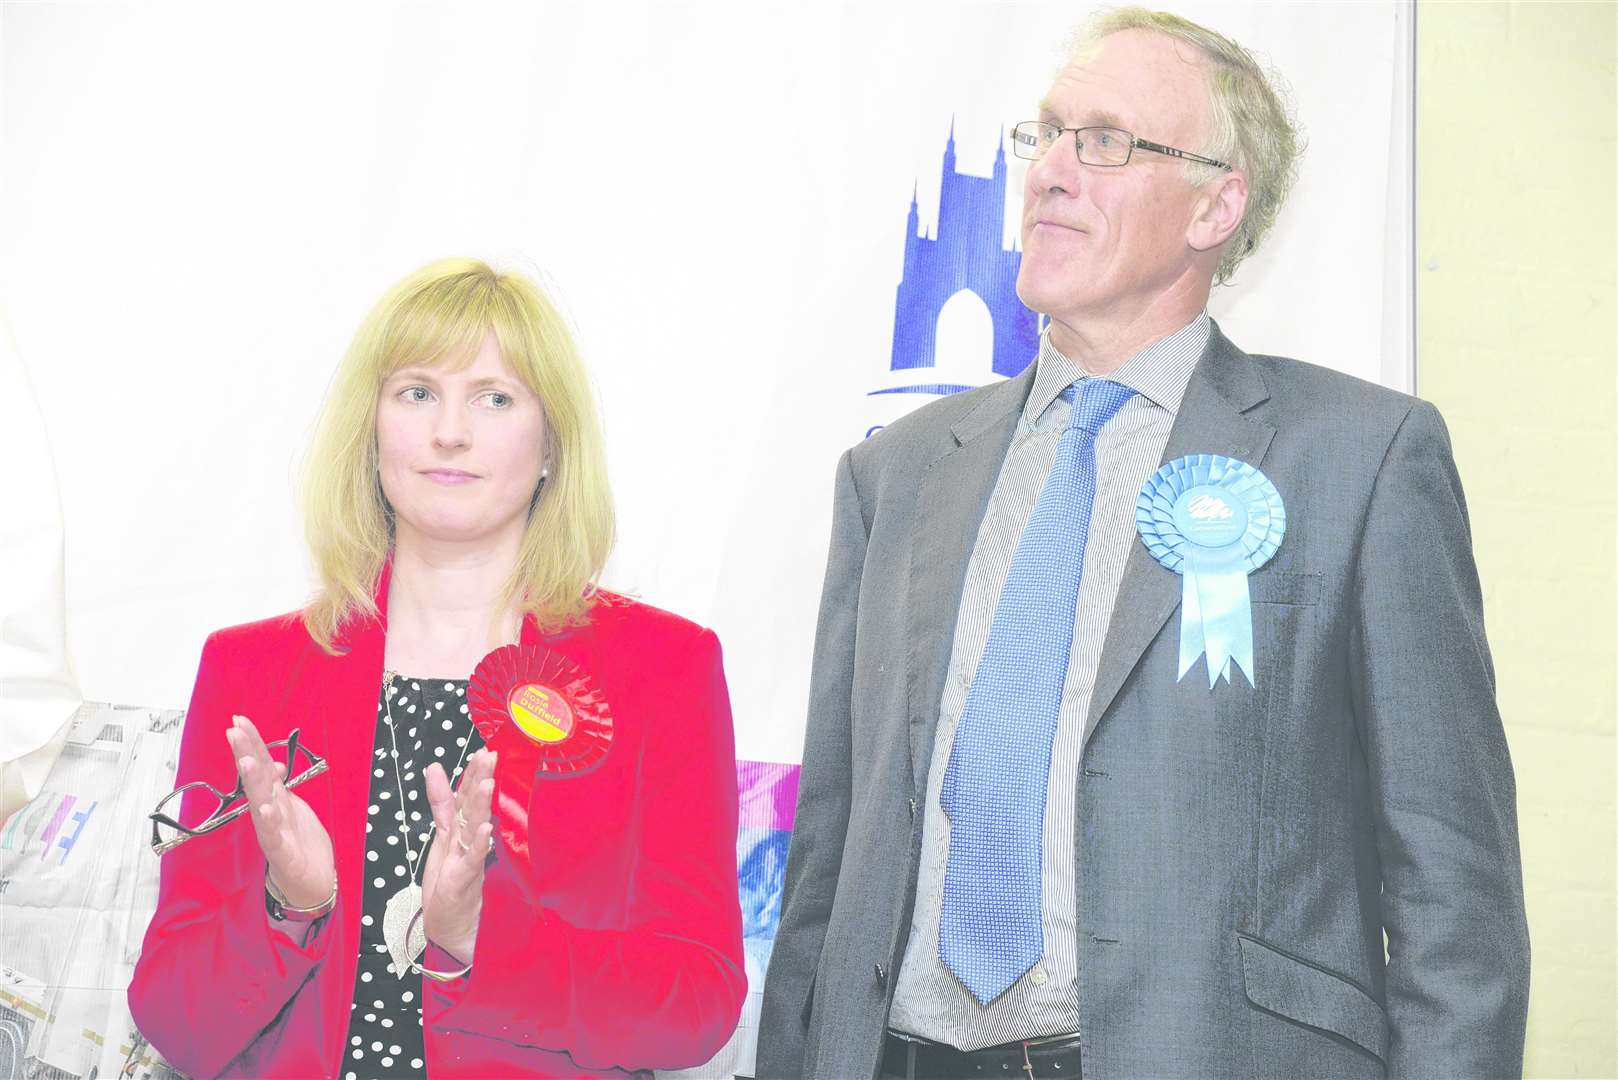 Rosie Duffield defeated Sir Julian Brazier at the polls in 2017